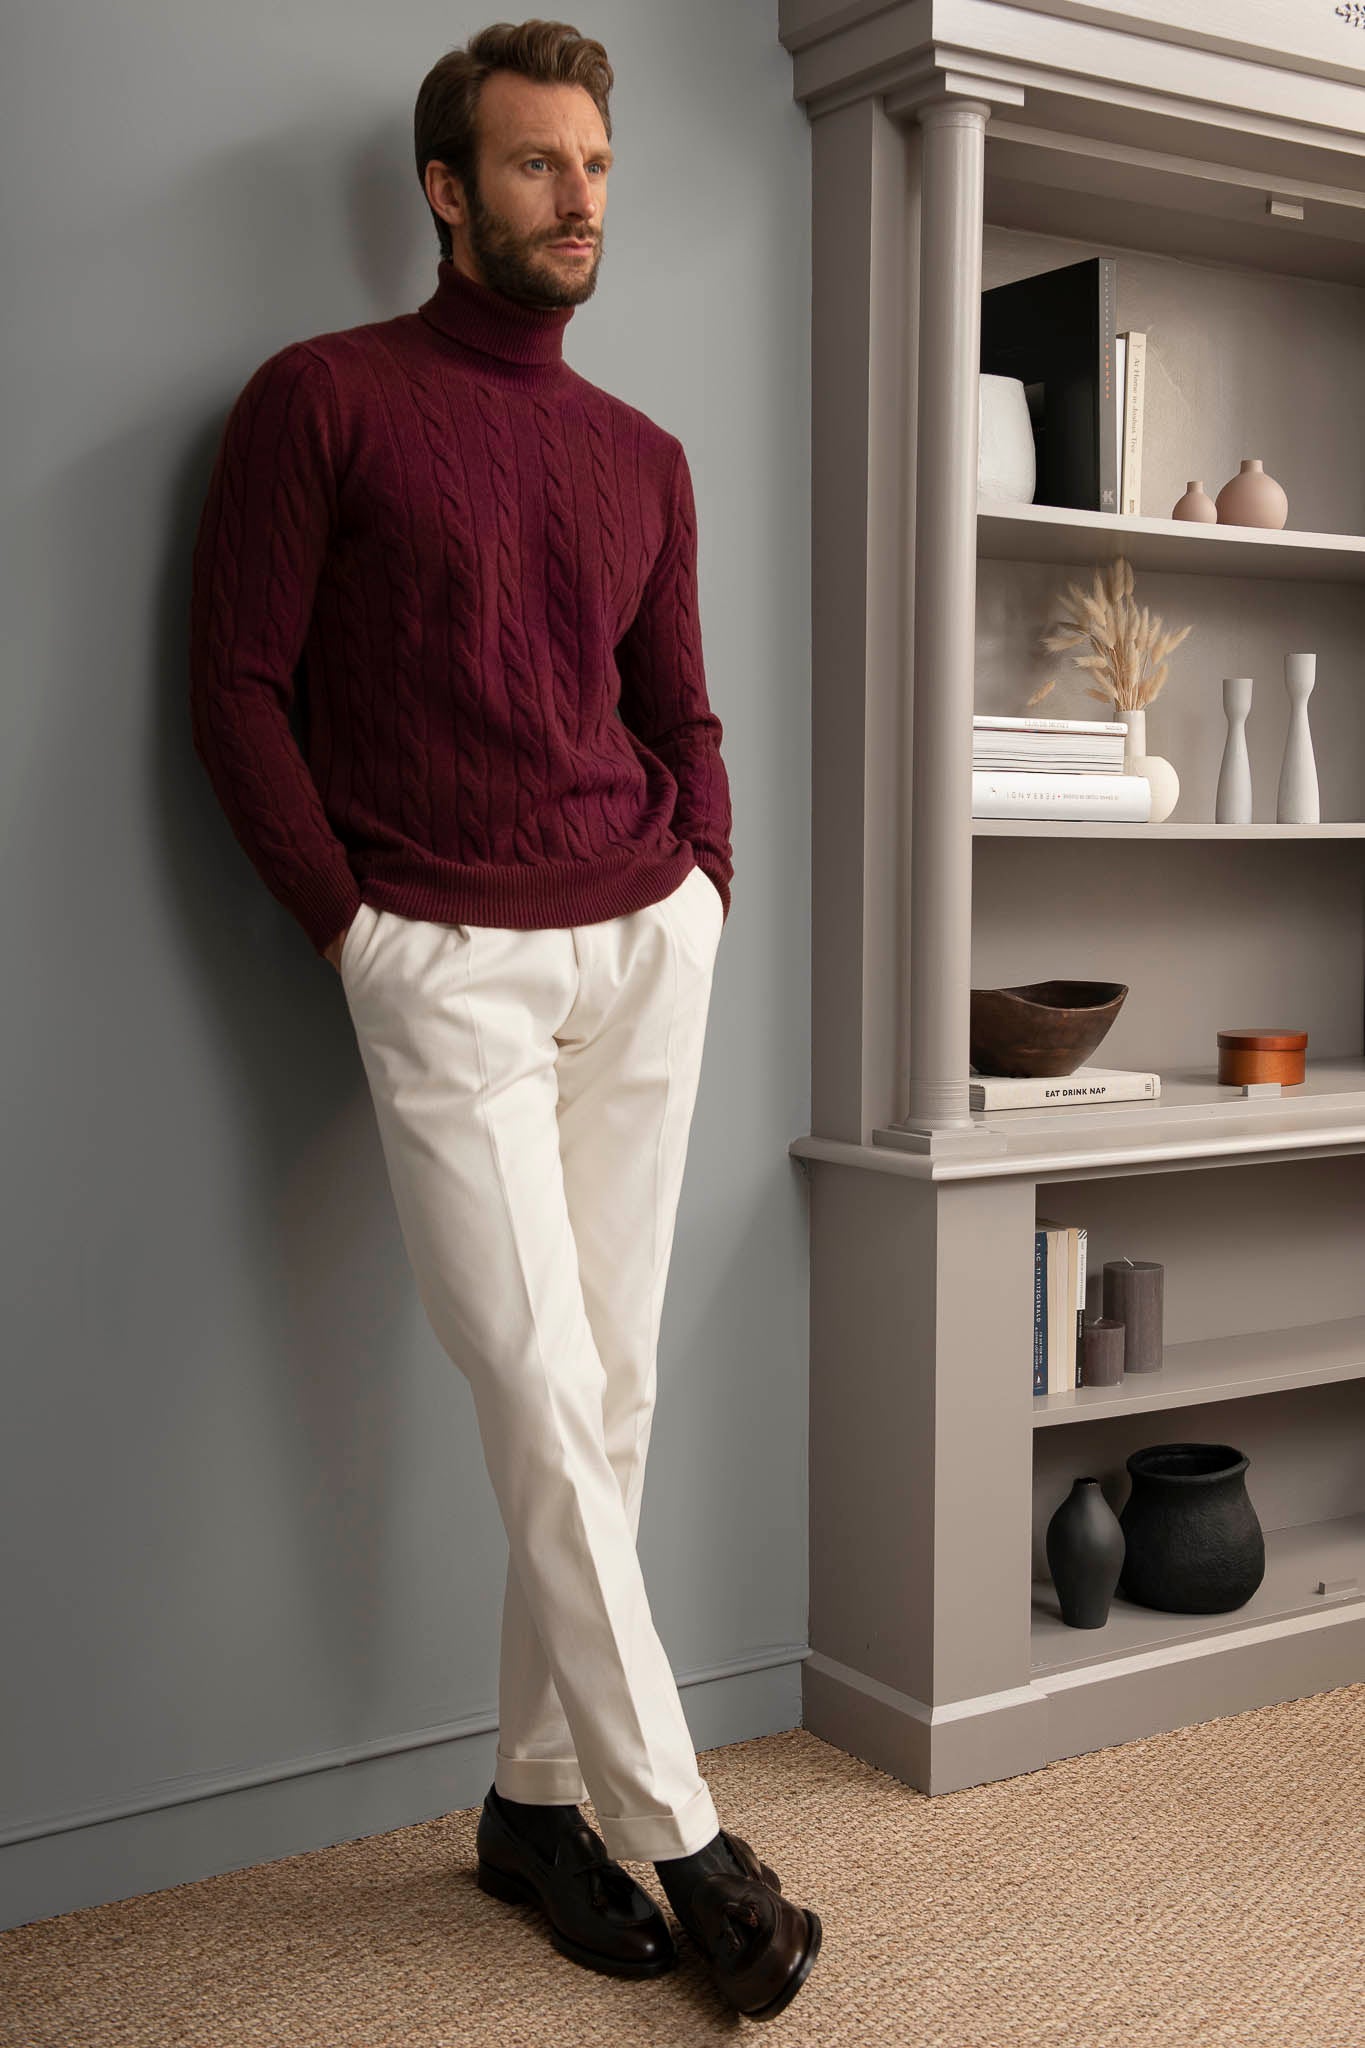 Bordeaux turtleneck – Made in italy